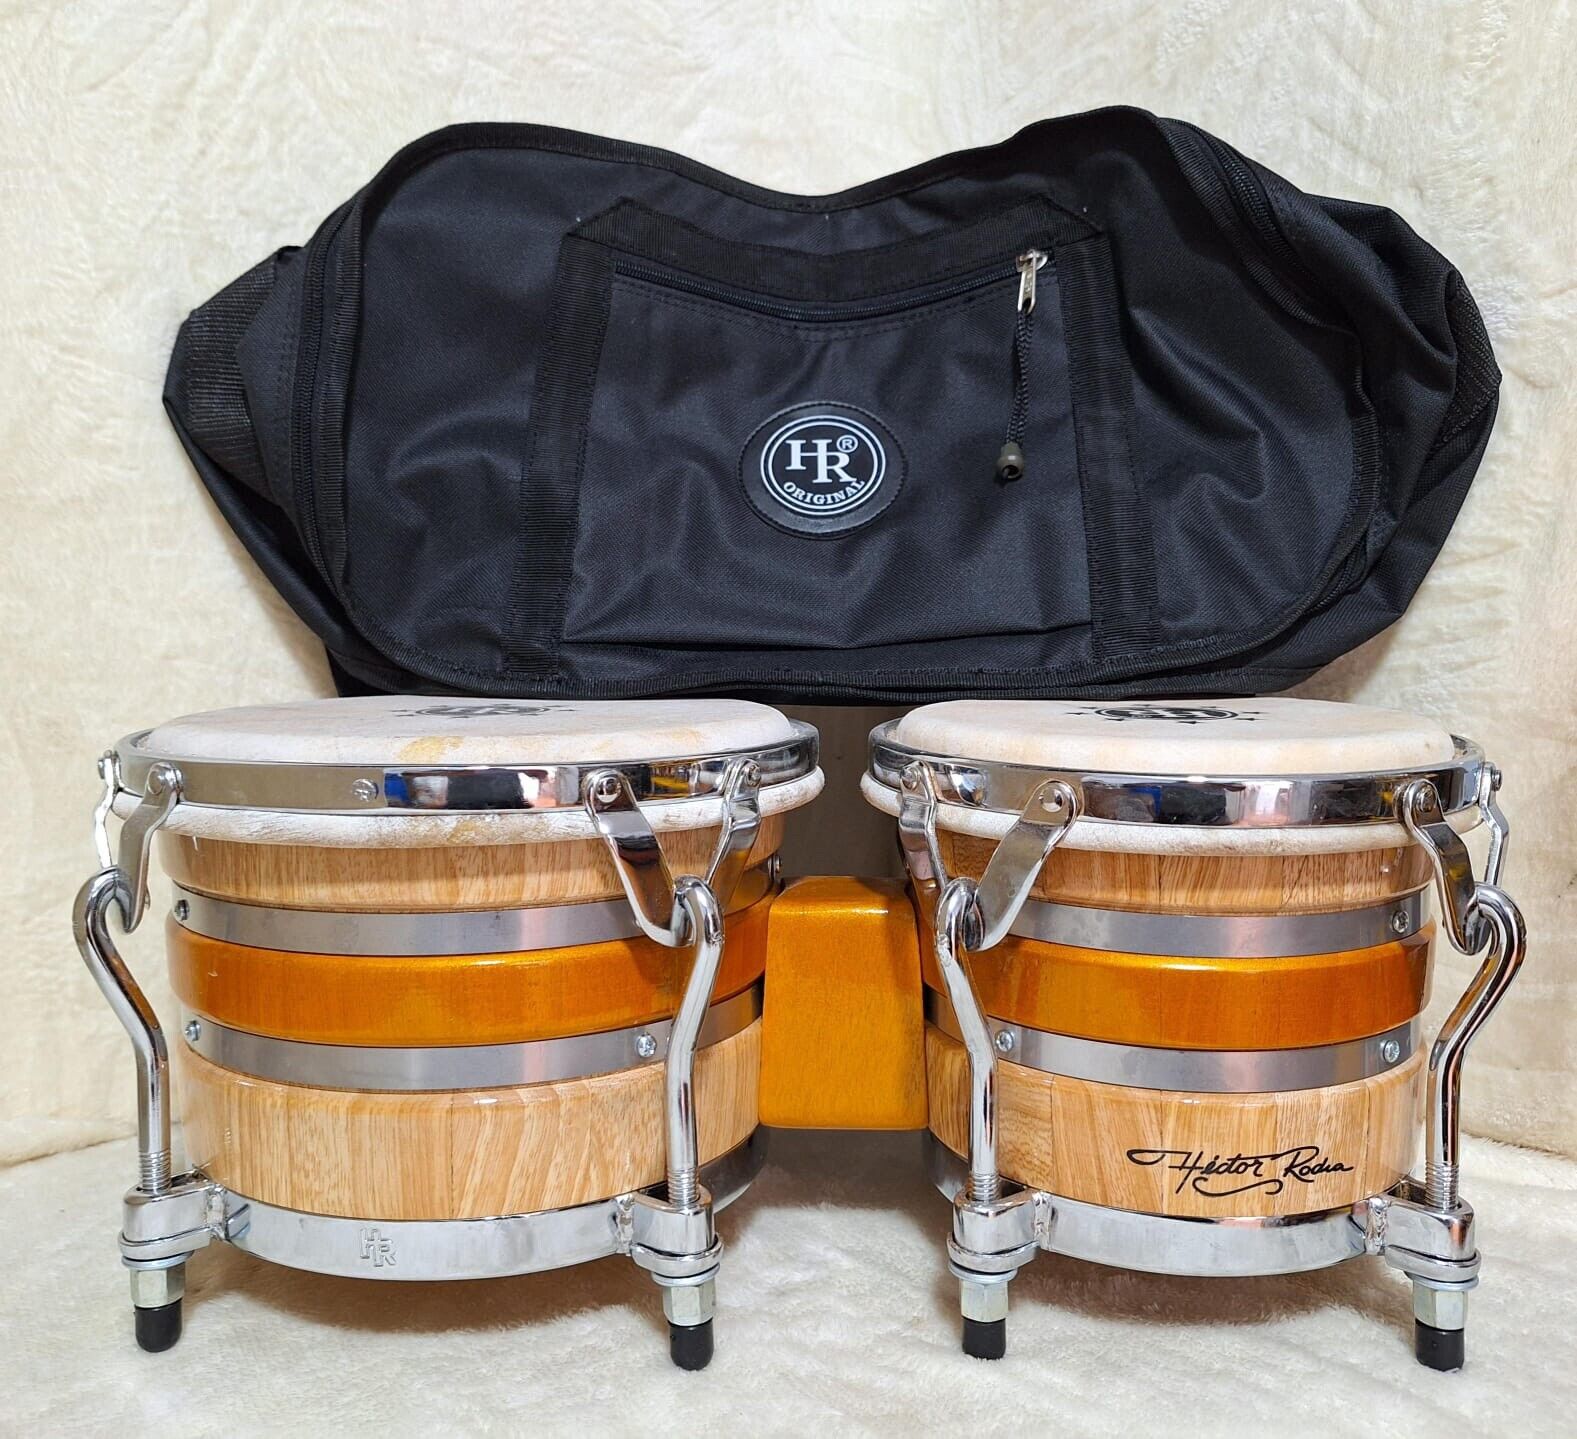 This Is A Set Hand Made HR El piernas Bongo From Colombia Natural Wood 2